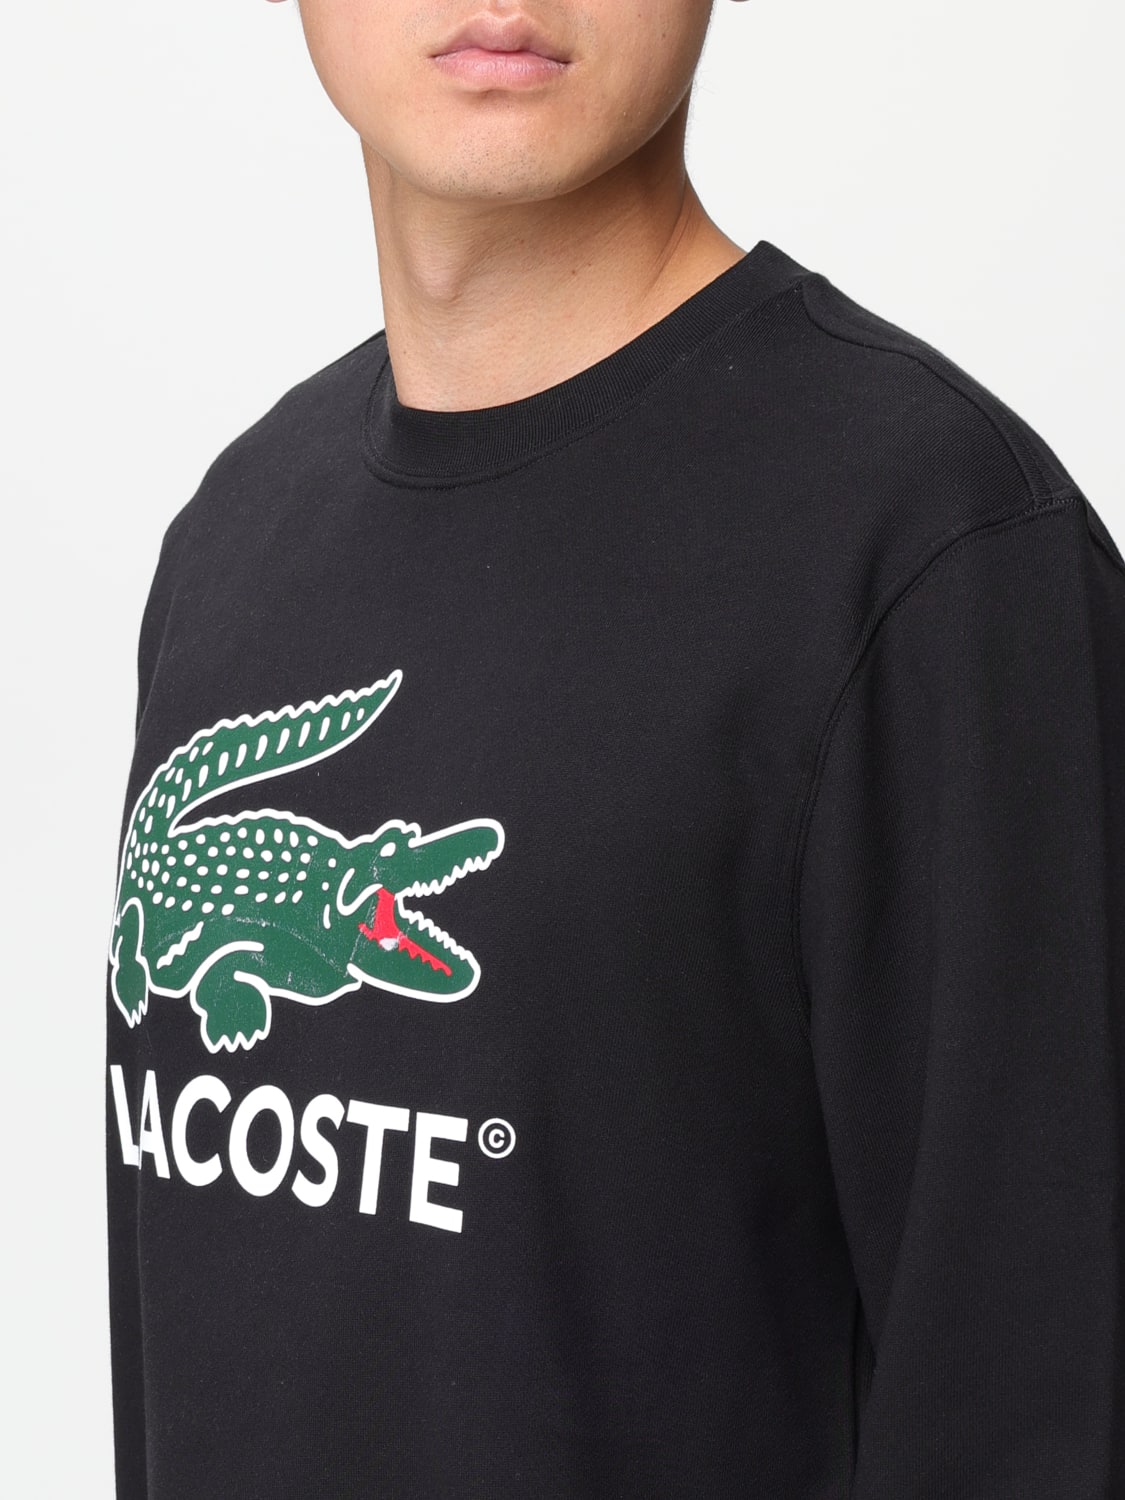 LACOSTE: sweater for man - Black | Lacoste sweater SH1281 online at ...